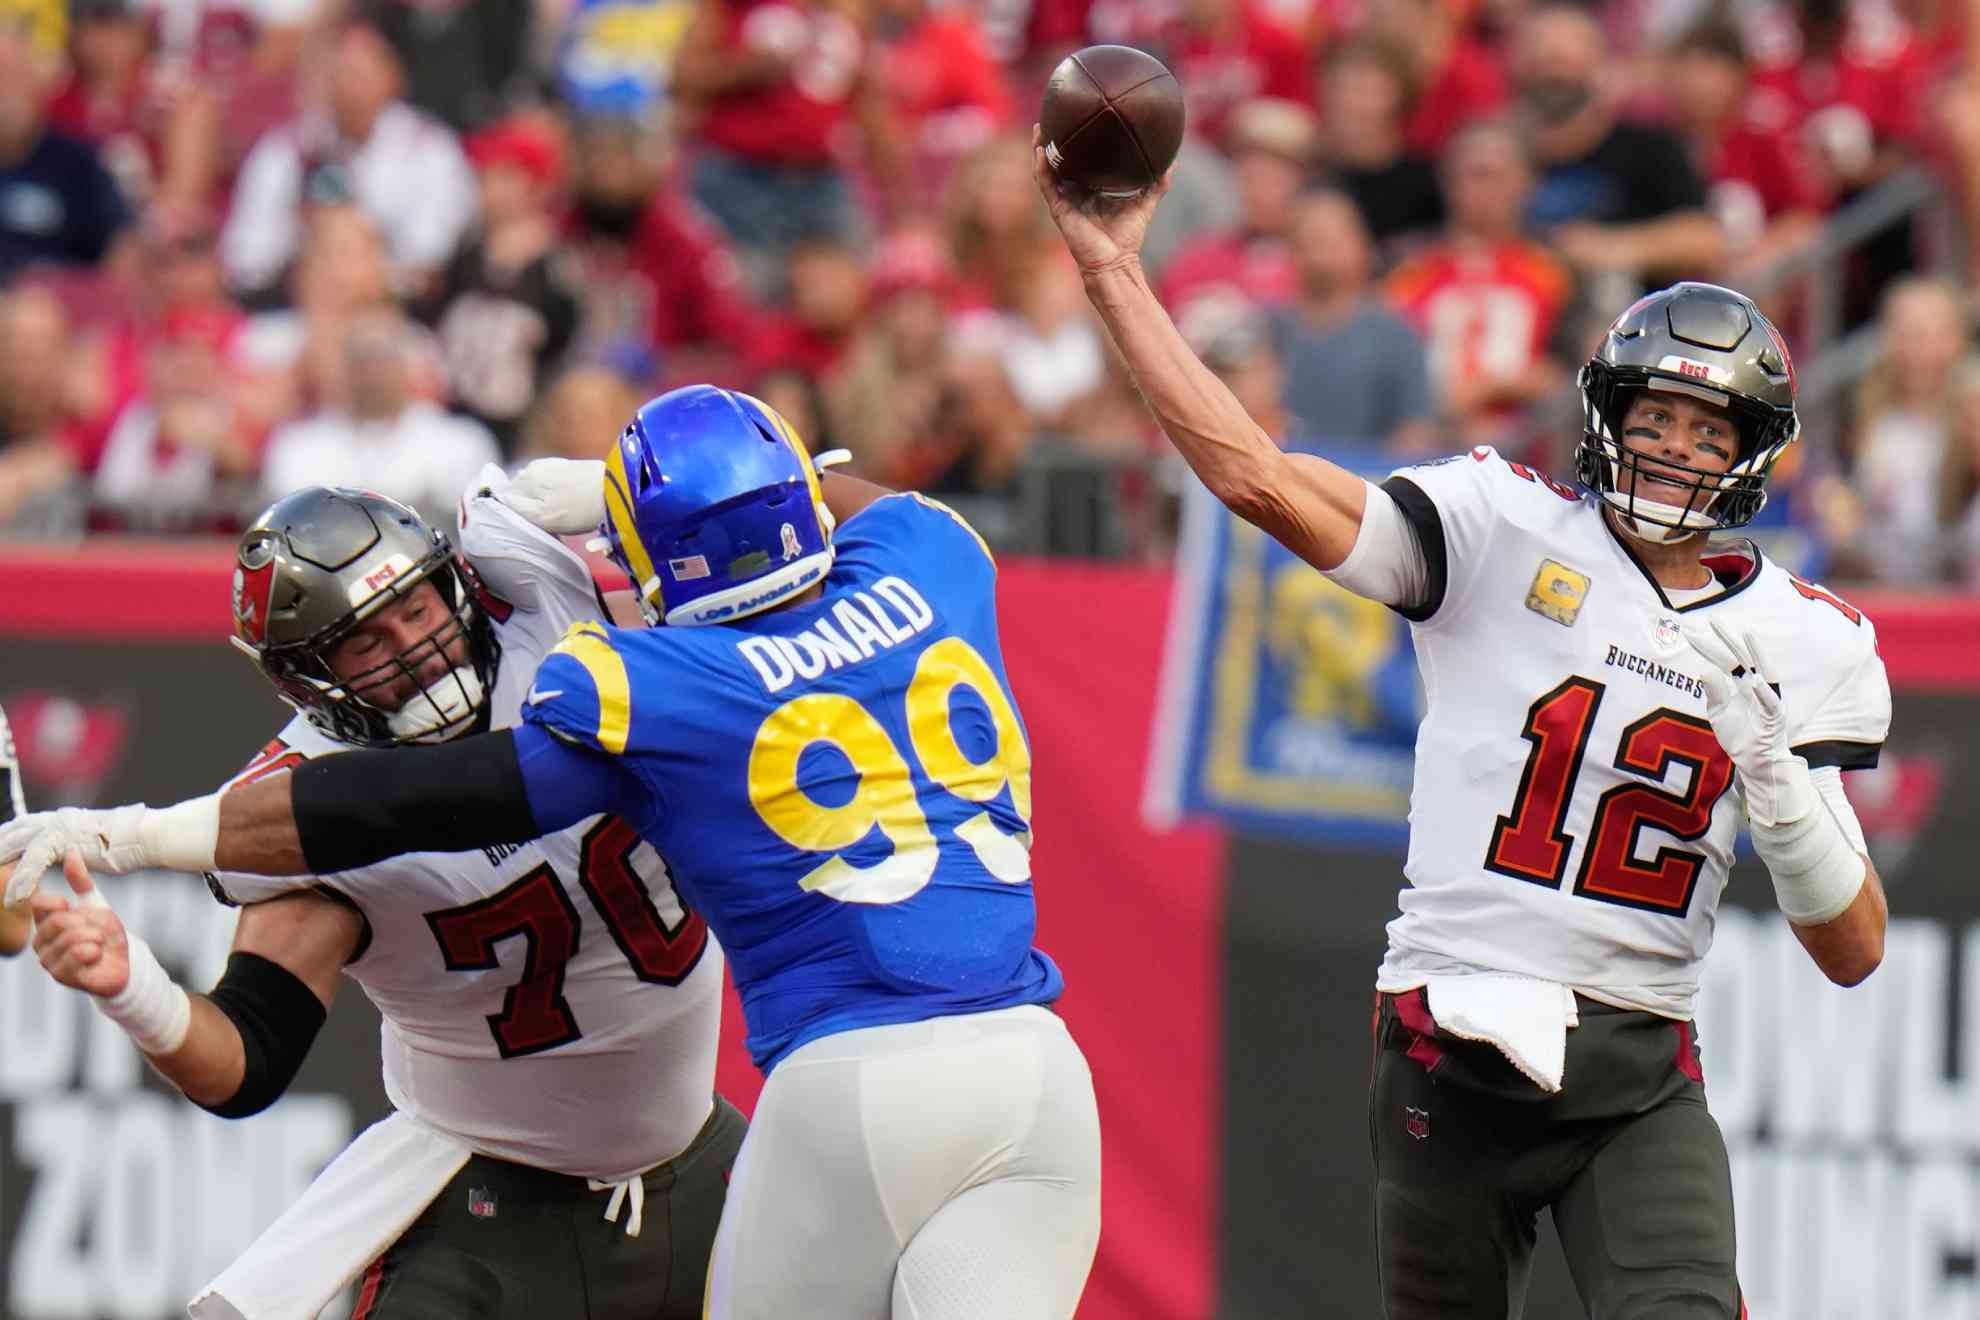 Rams 13-16 Buccaneers: Final score and highlights